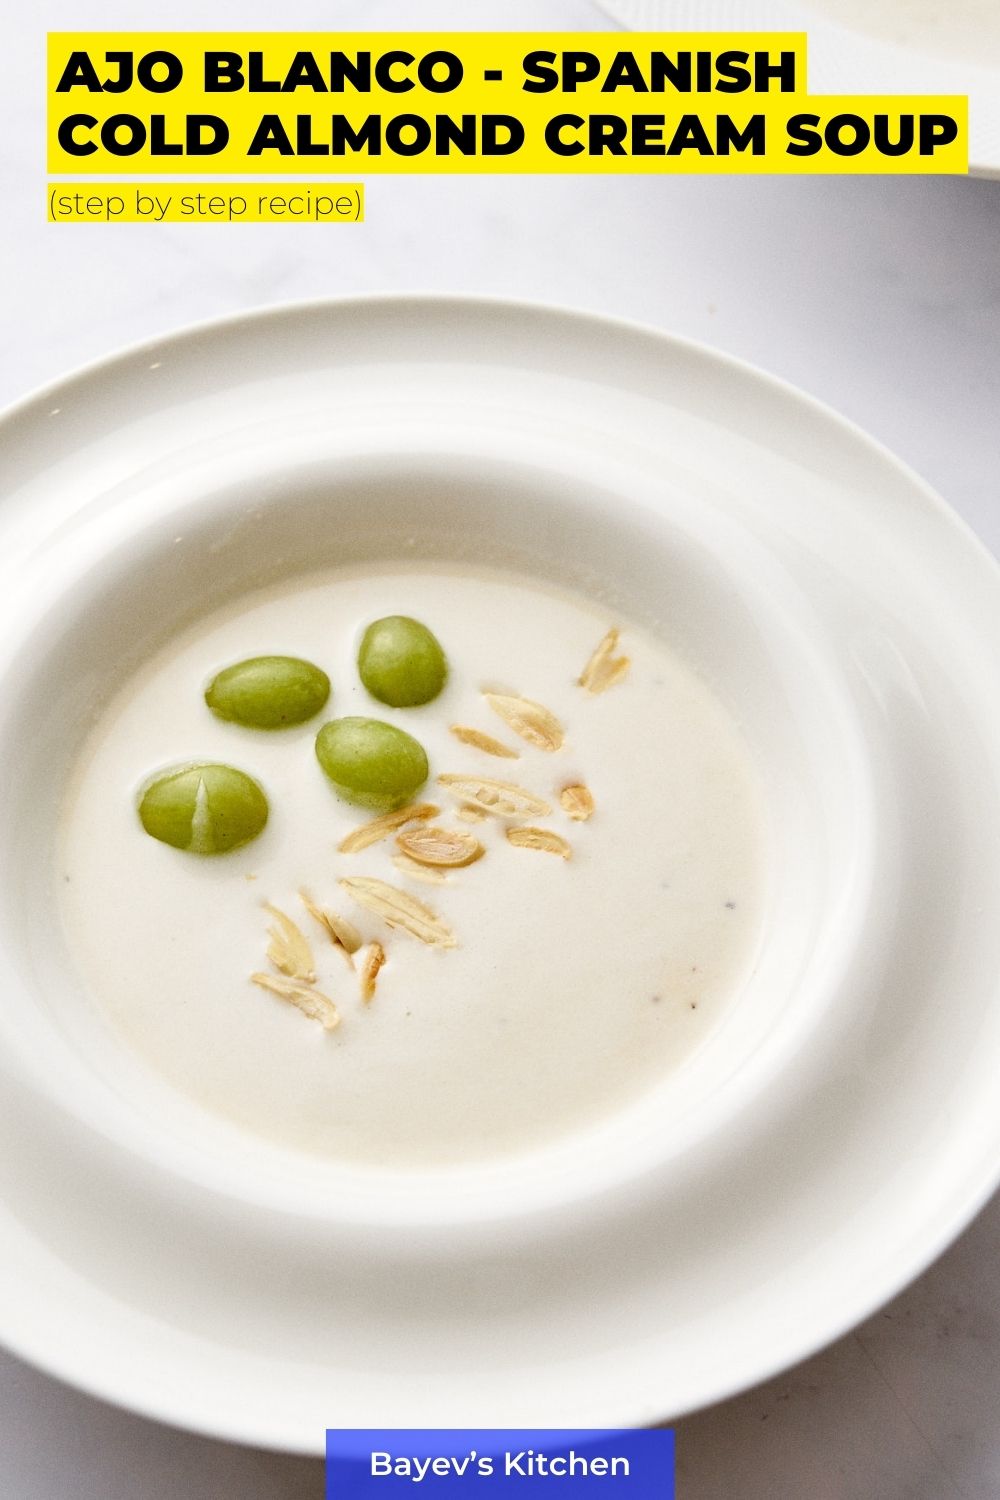 Ajo Blanco is a Spanish cold creamy white soup made from raw almonds. It is similar to gazpacho and contains its four main ingredients: water, olive oil, garlic and bread. Sometimes this soup is called "White Gazpacho".
The main ingredient in Ajo Blanco is almonds. It has to be: fragrant, fresh and not stale.
